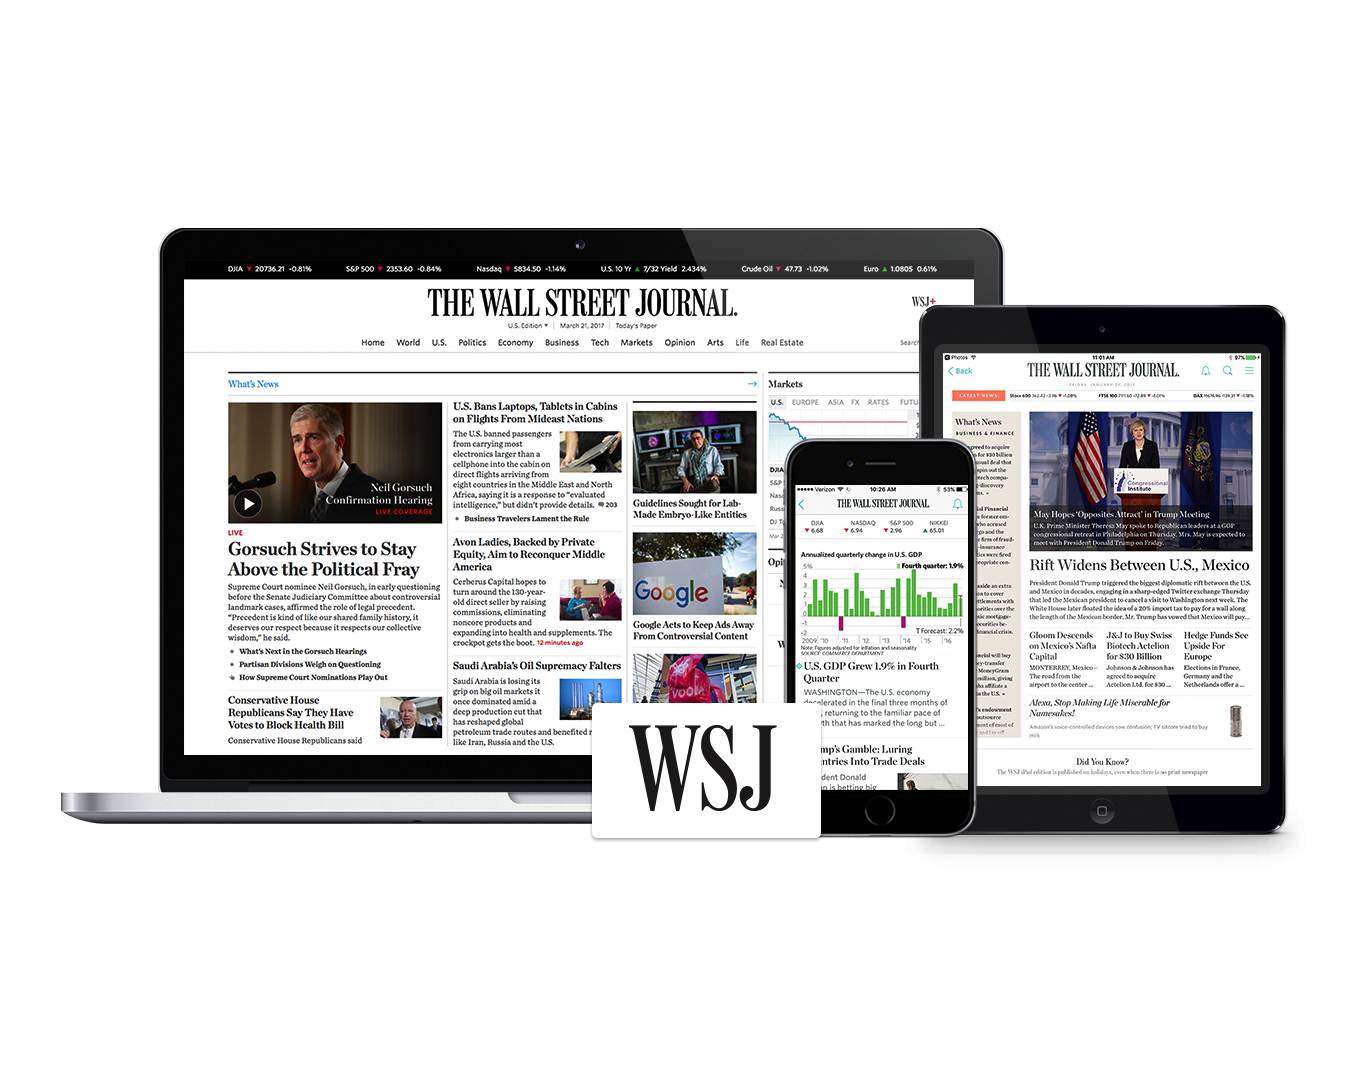 online subscription to Wall Street Journal